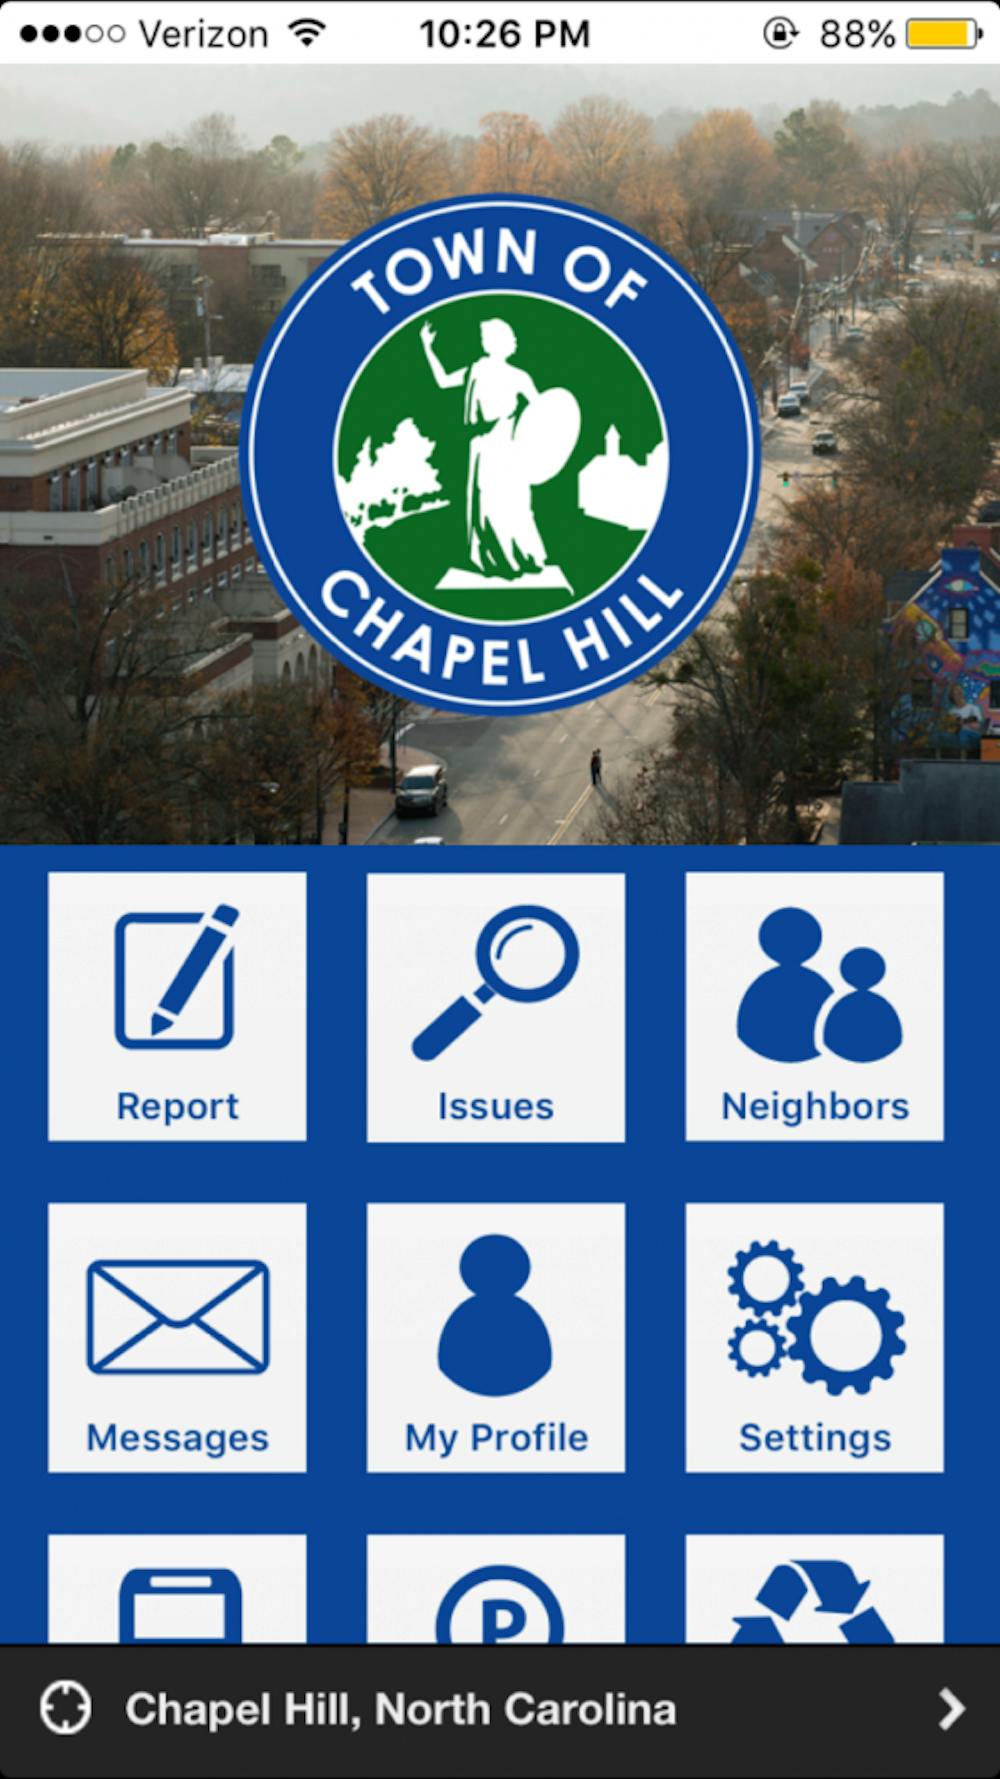 Chapel Hill Connect, an app that allows residents to report non-emergency issues to the Town of Chapel Hill, was released on Thursday, May 17.